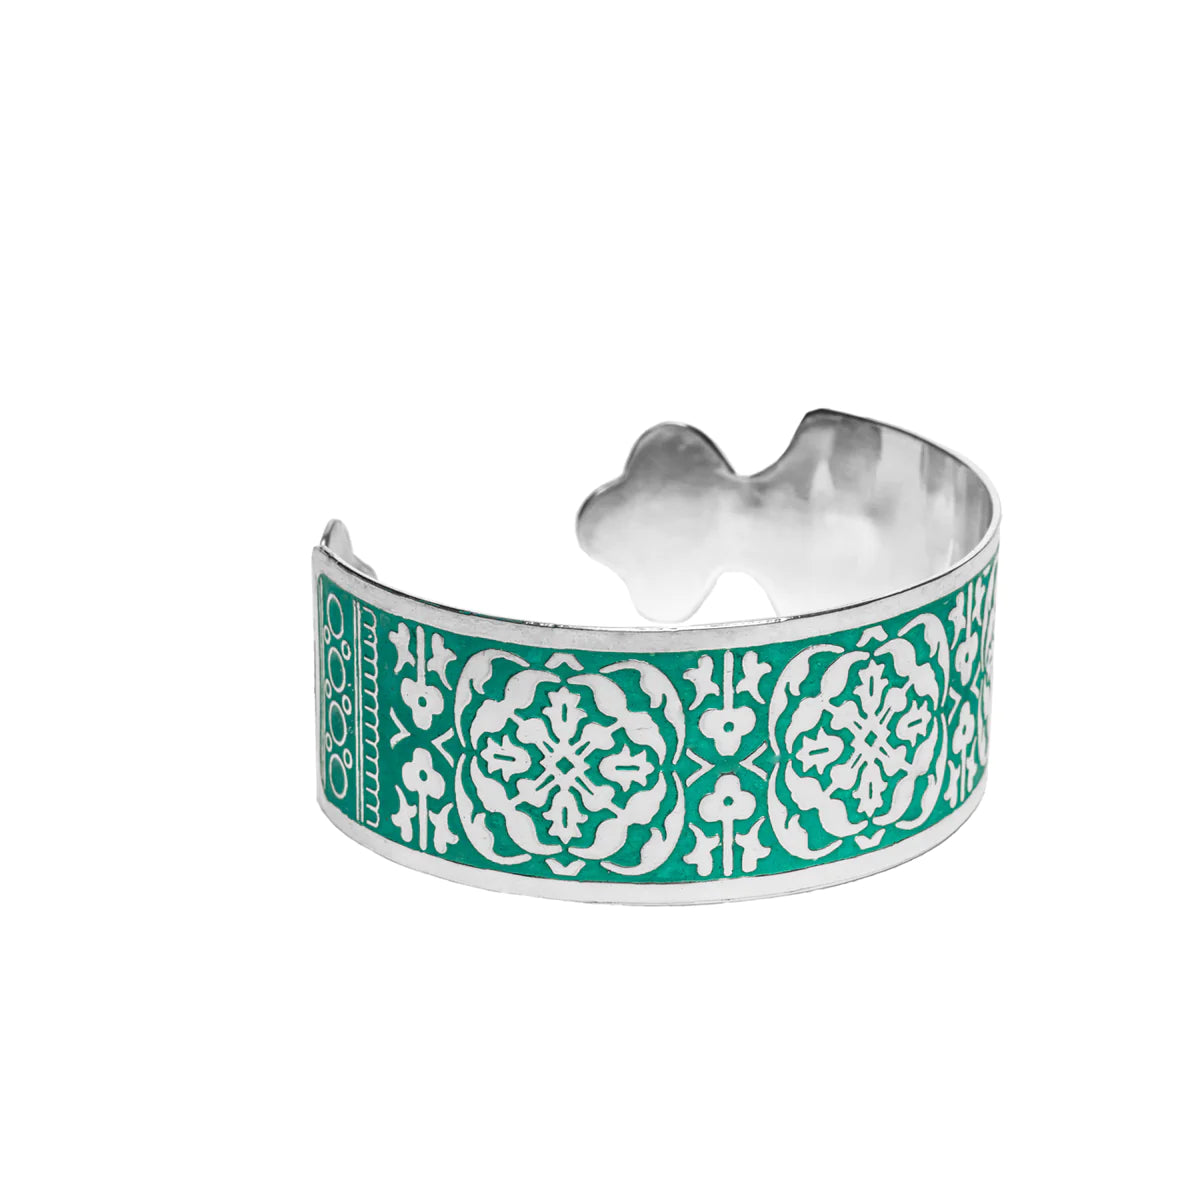 Angelco Accessories Teal motif cuff at angled view on white background